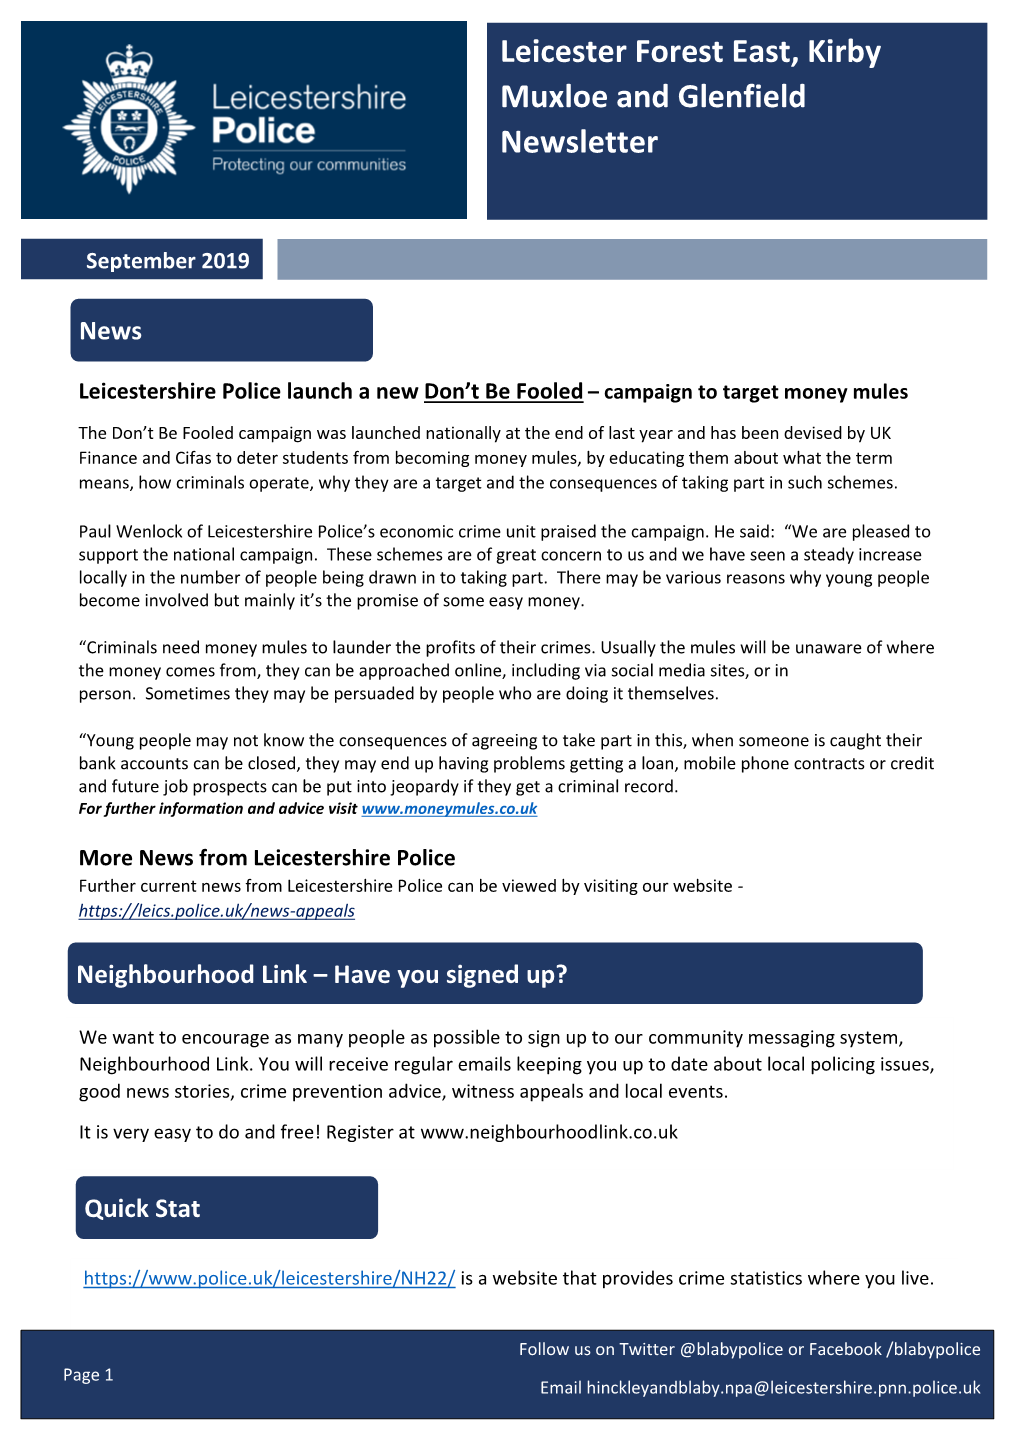 Leicester Forest East, Kirby Muxloe and Glenfield Newsletter